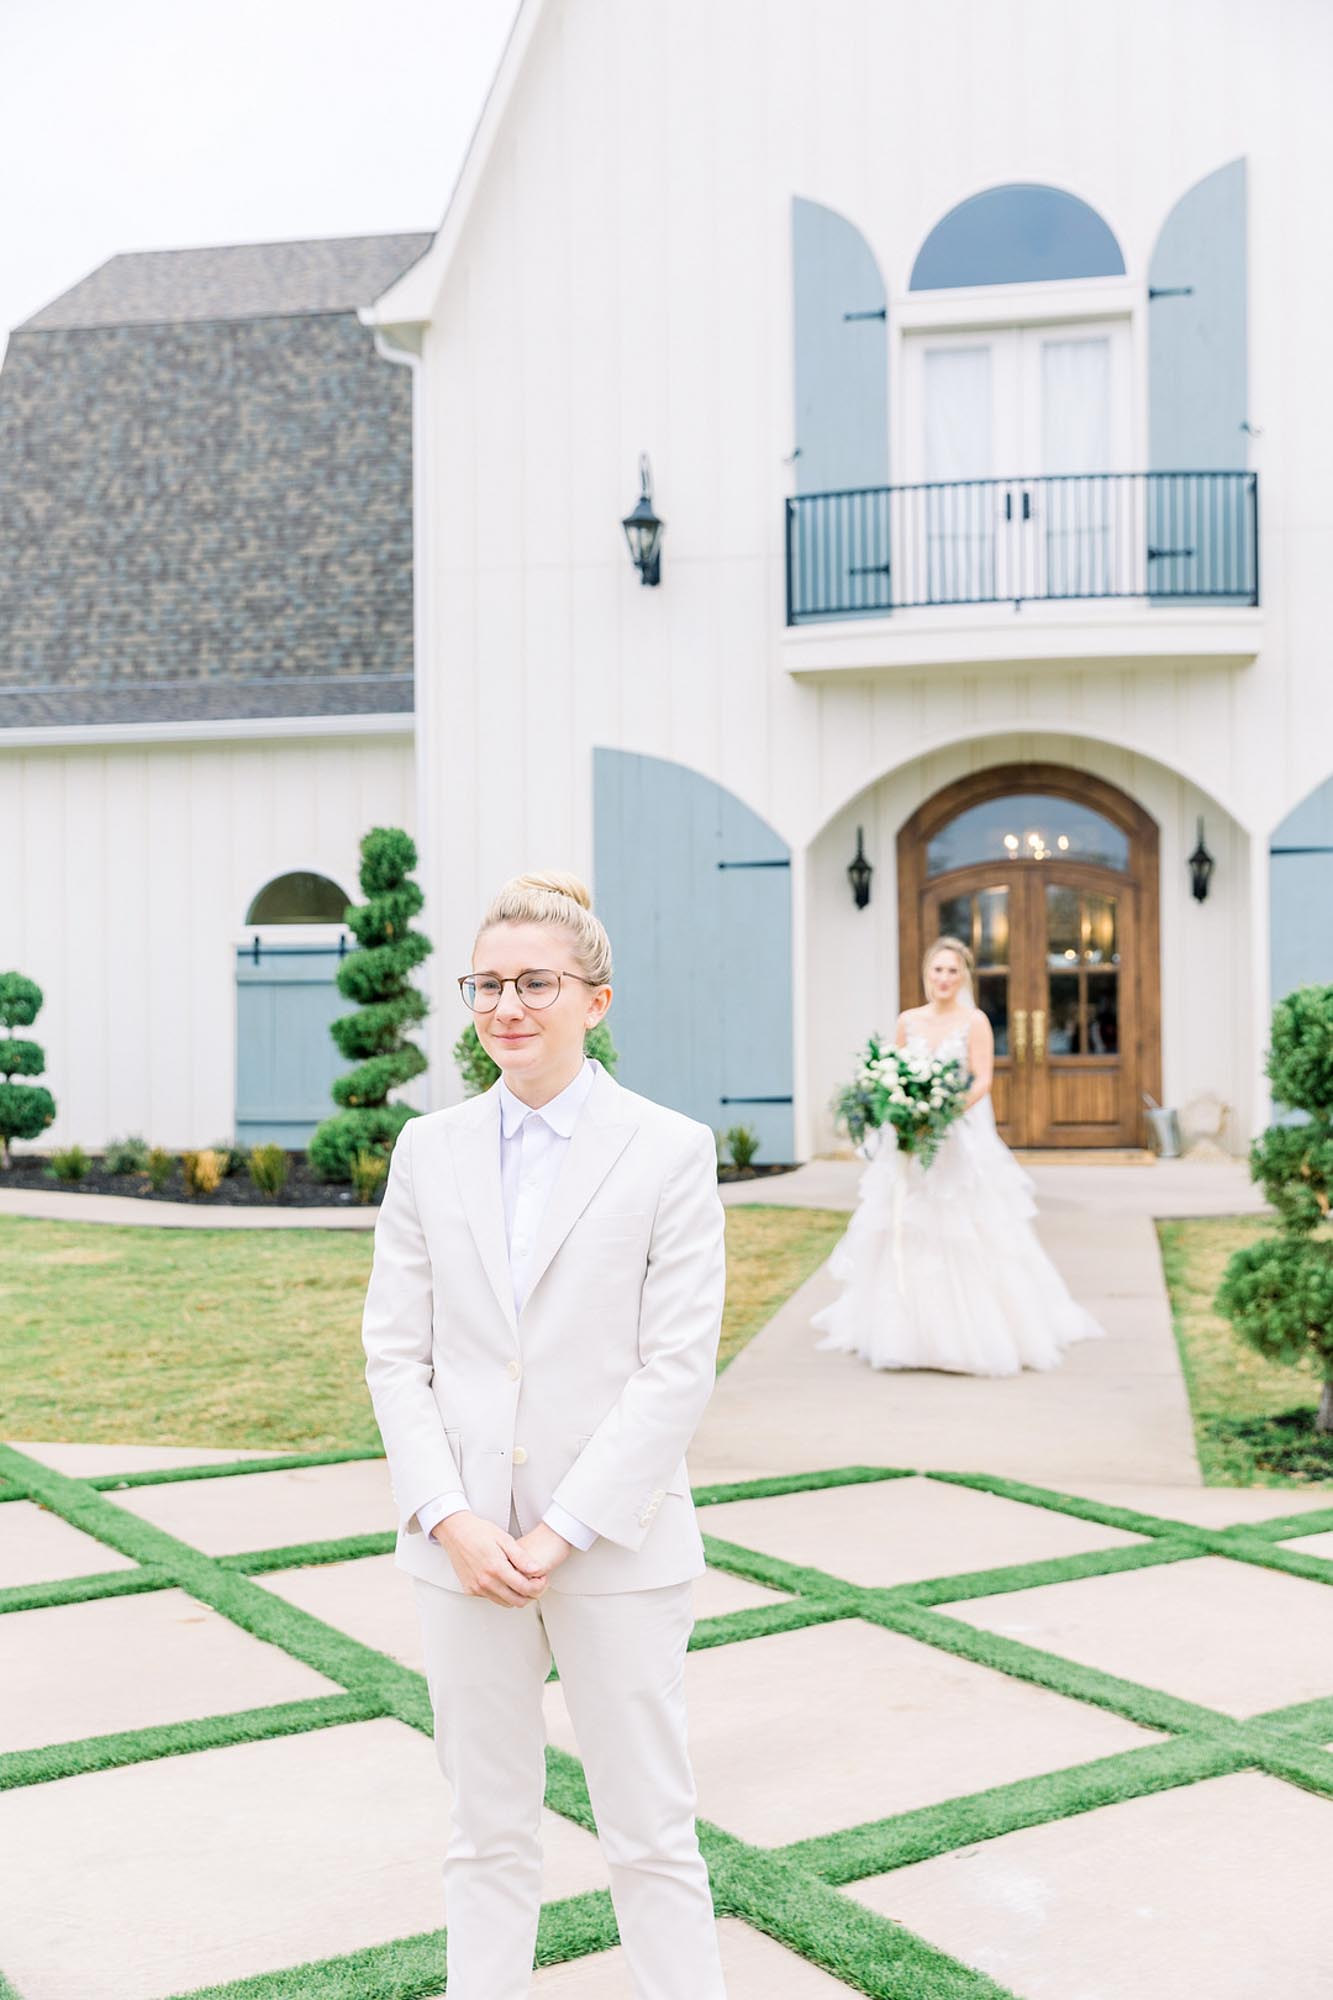 Bright and beautiful Texas farmhouse wedding | Kimberly Harrell Photography | Featured on Equally Wed, the leading LGBTQ+ wedding magazine